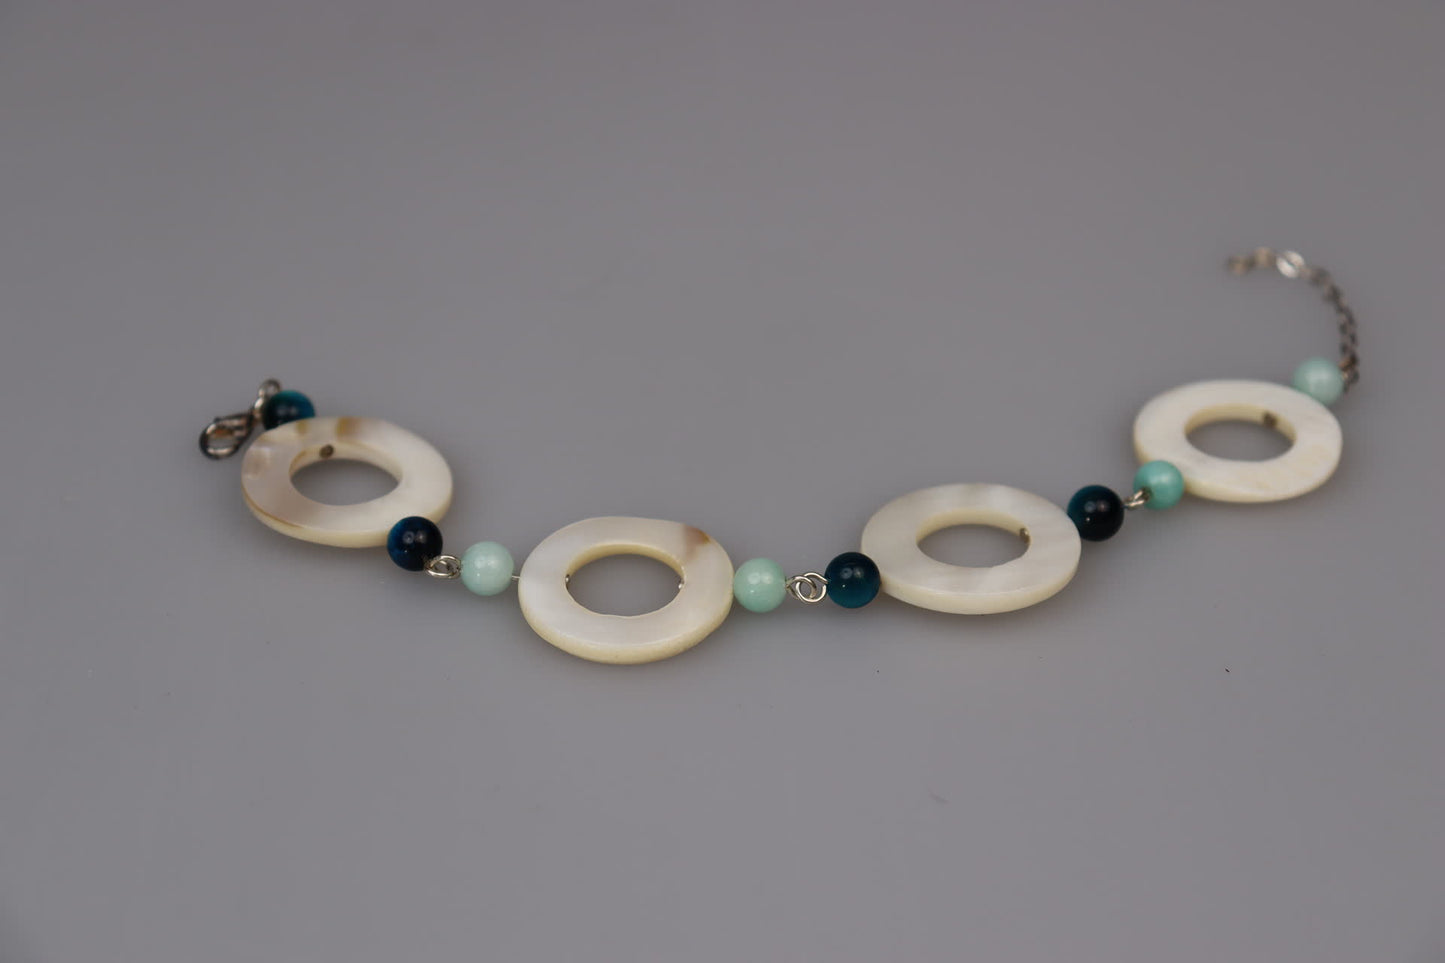 Mother of Pearl Donut, Aquamarine Tiger's Eye, Green Chalcedony, and Silver Bracelet